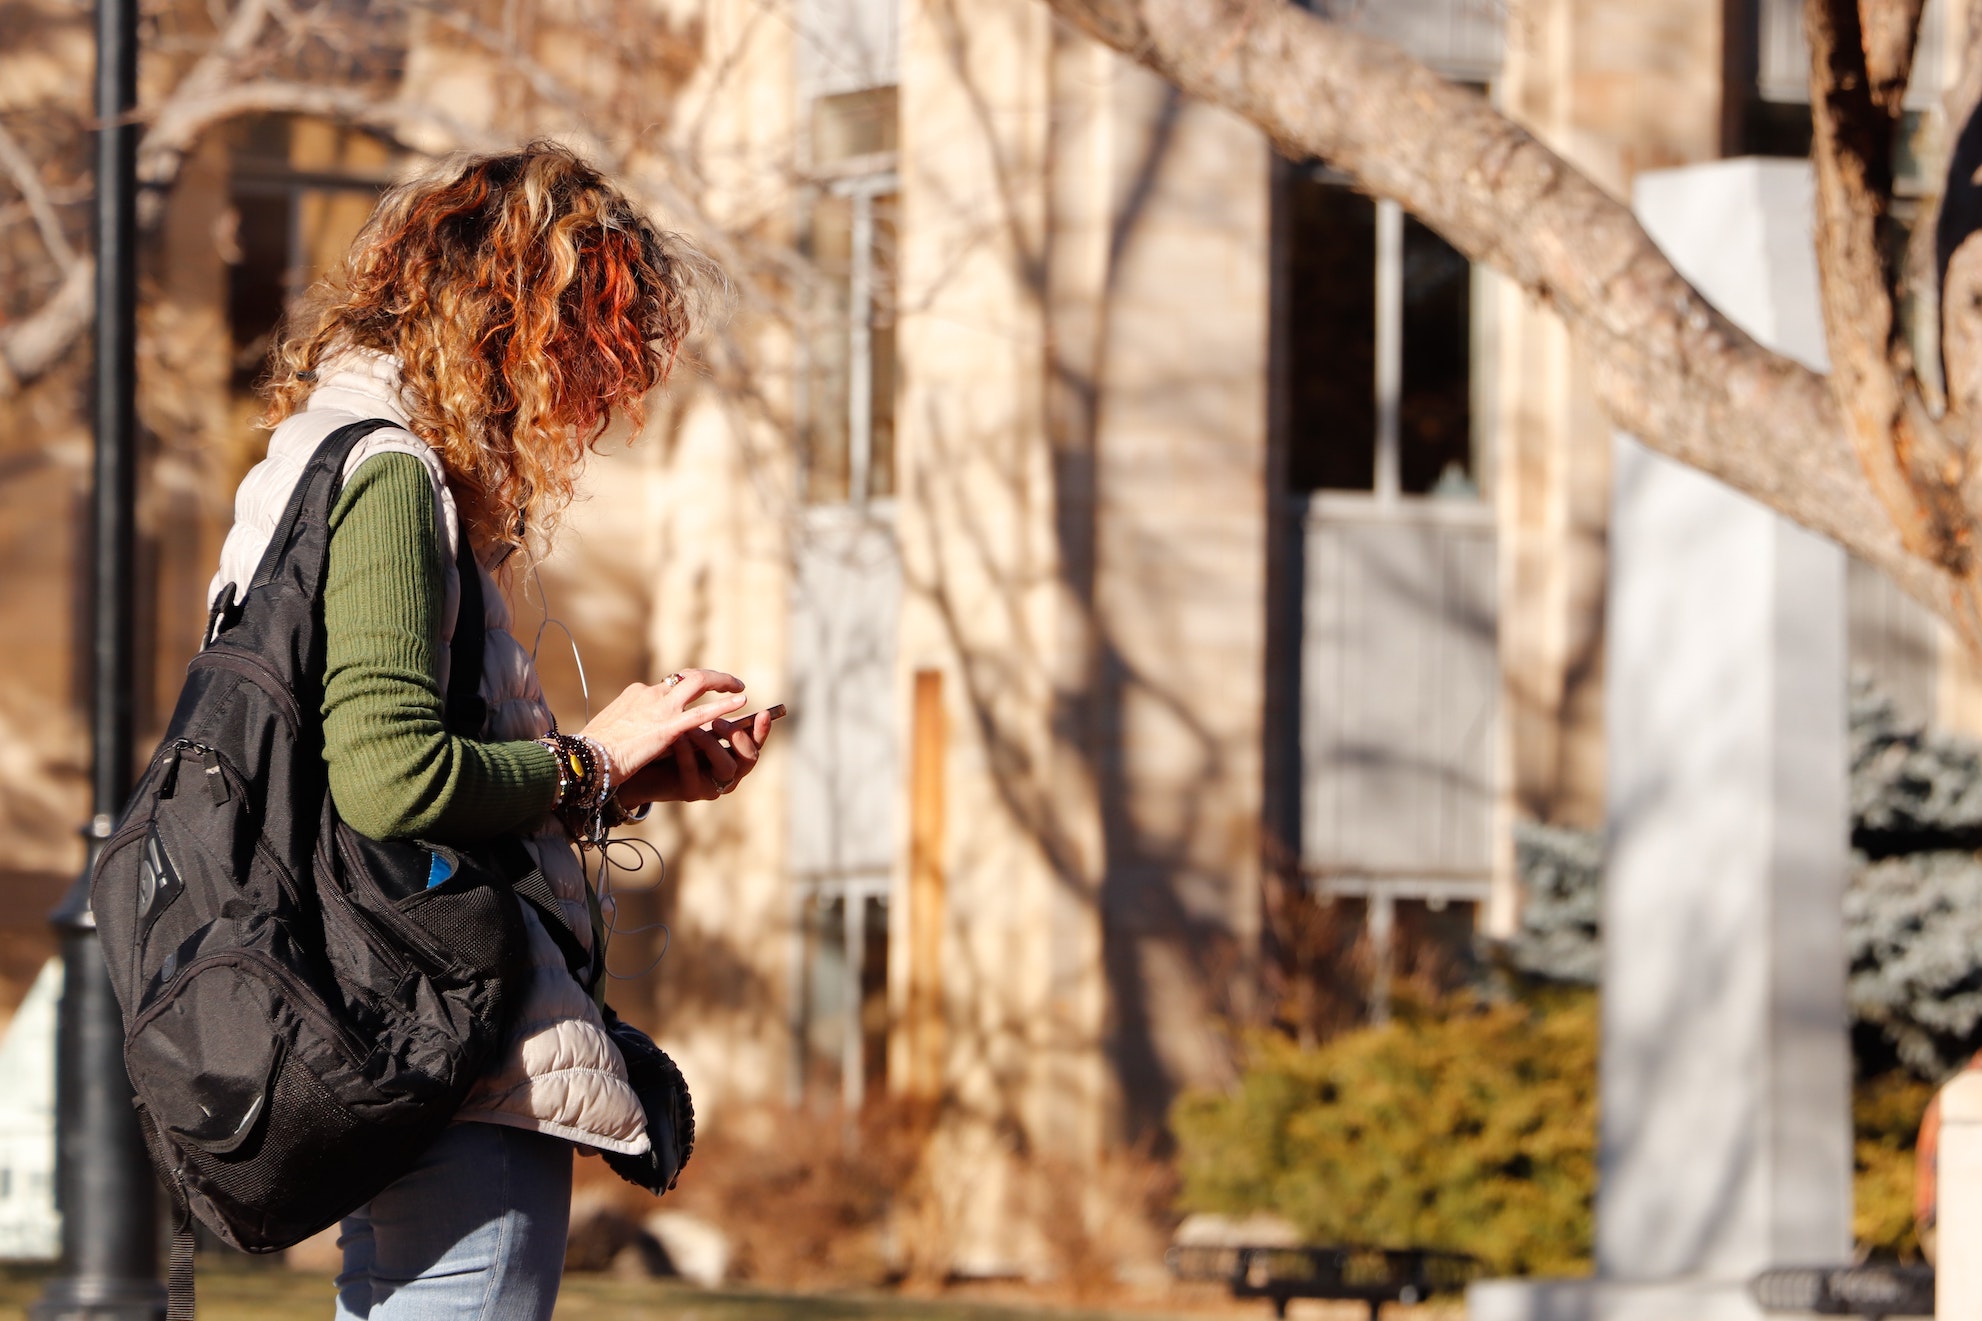 Student on campus using mobile phone